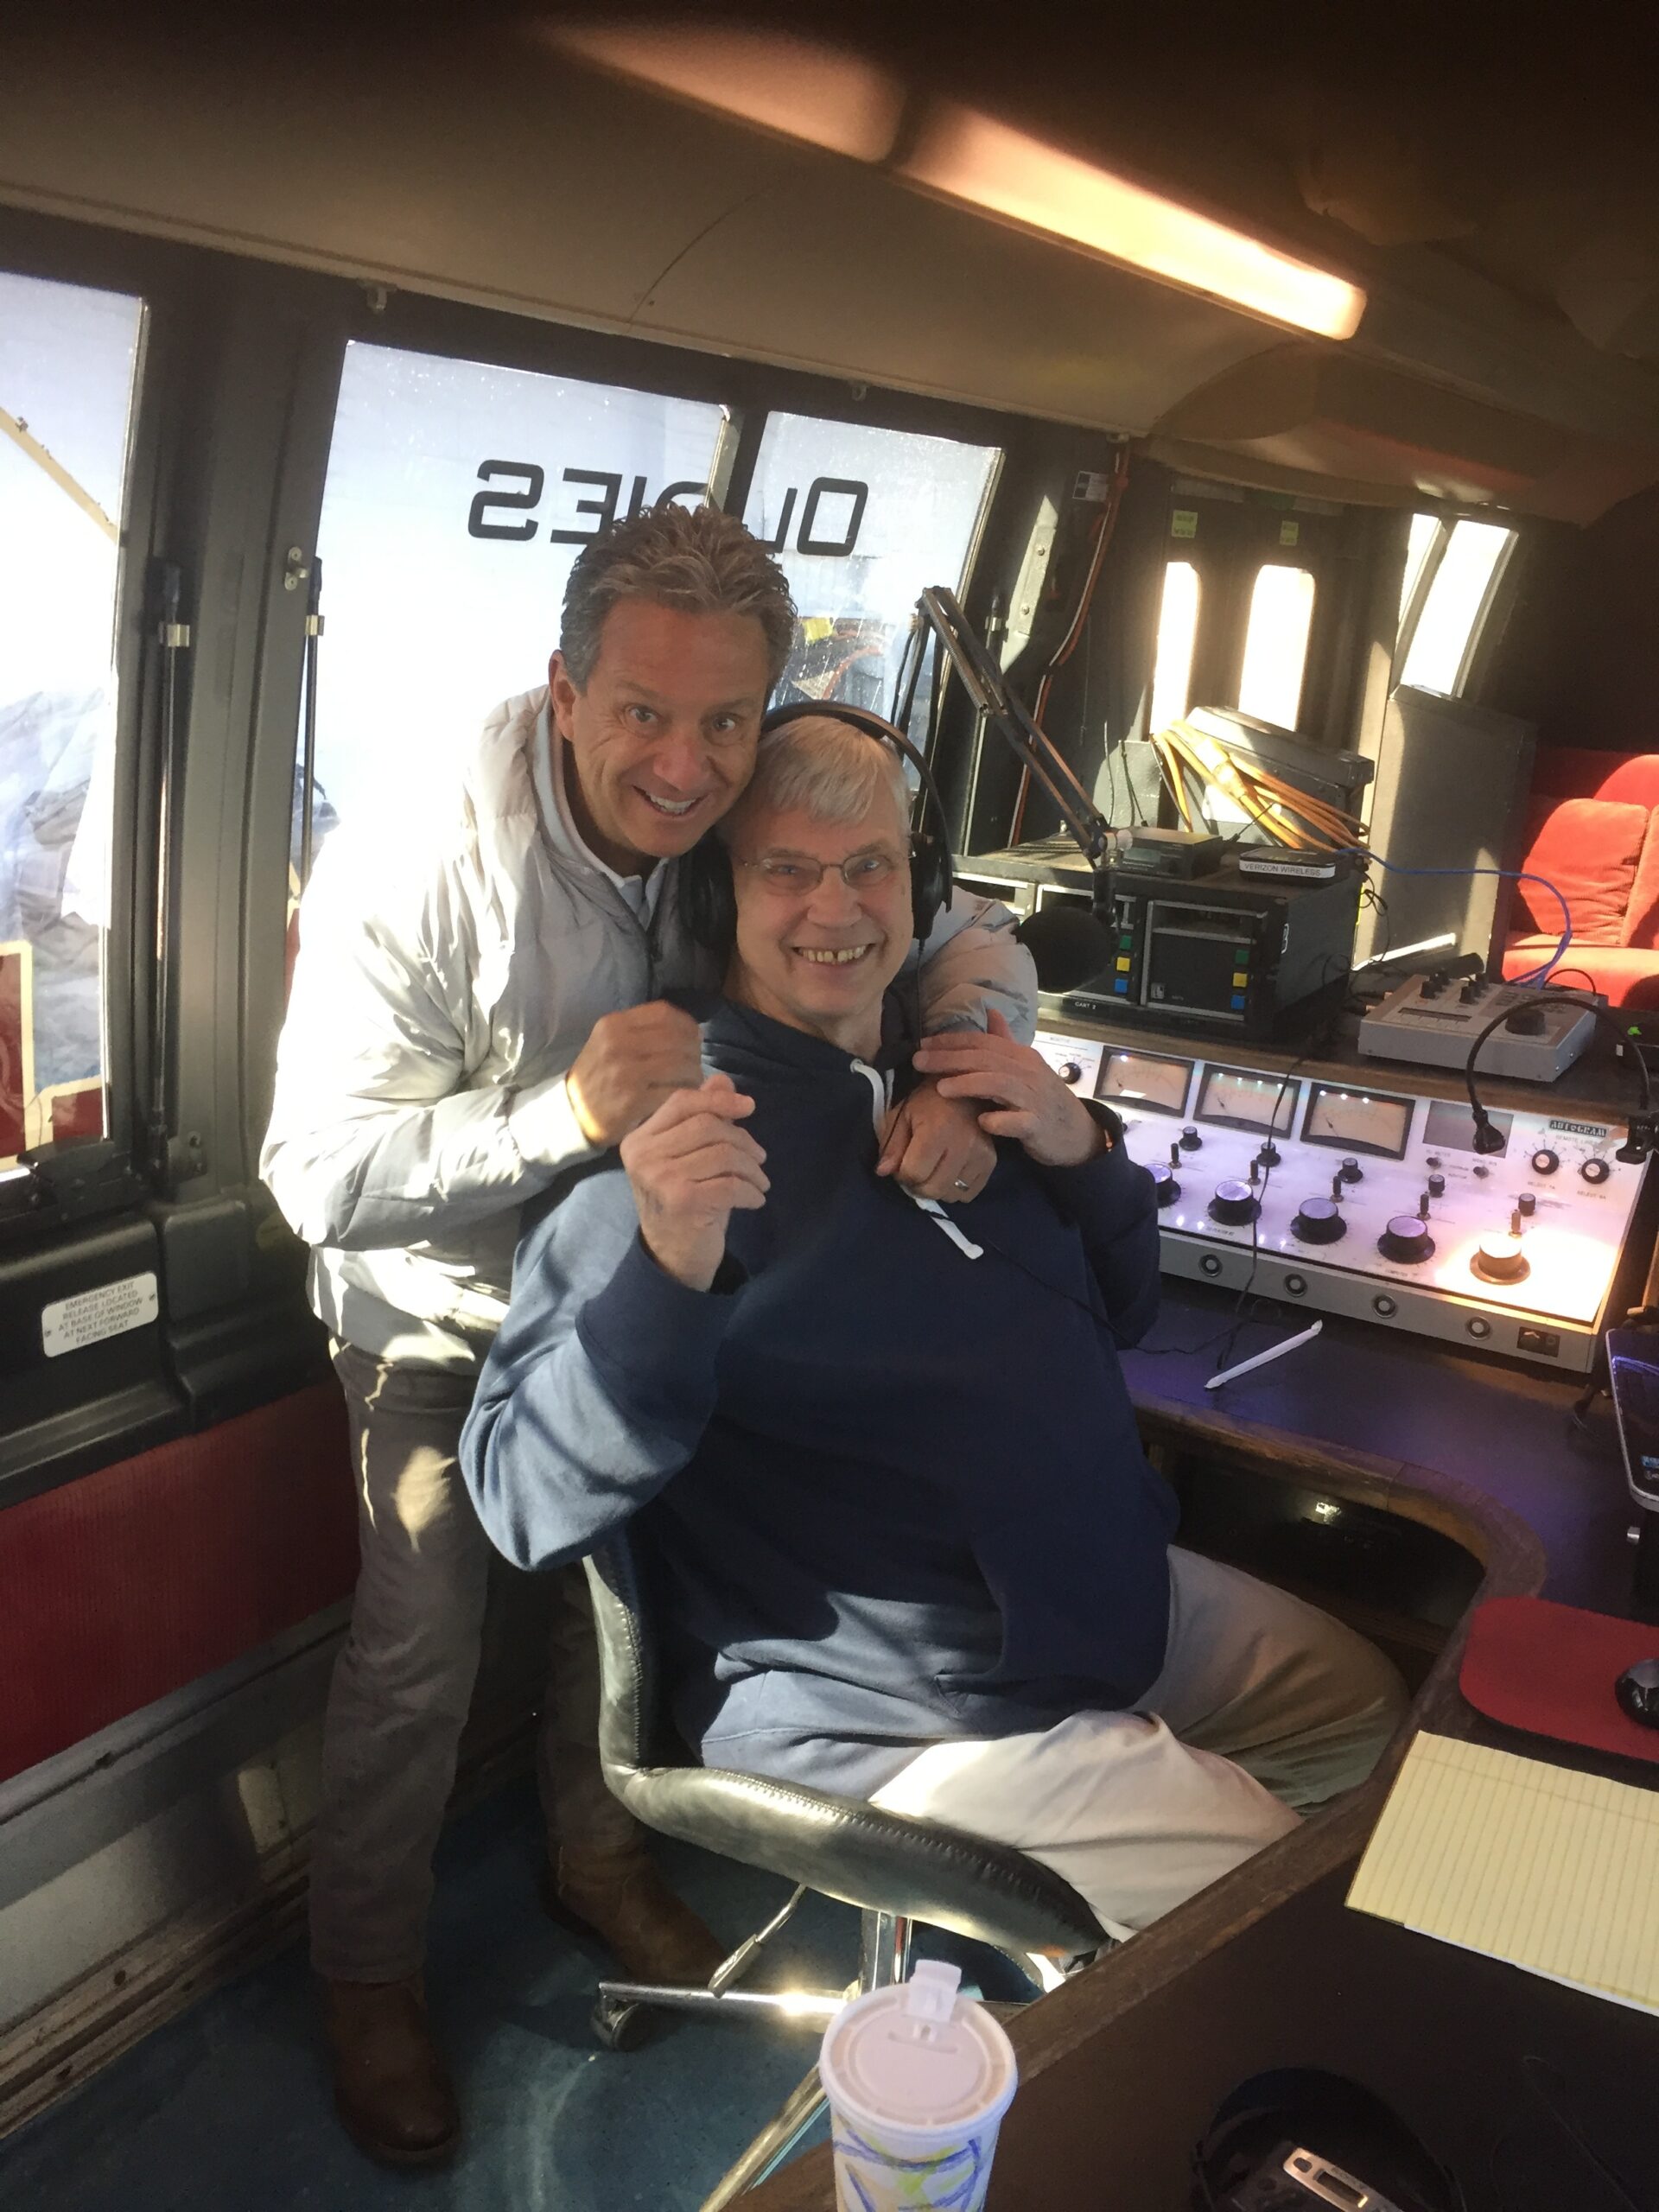 WLNG 91.1 FM's program director Bill Evans in the station's mobile broadcasting truck with deejay and general manager Gary Sapiane who has been playing  oldies for decades. COURTESY WLNG RADIO